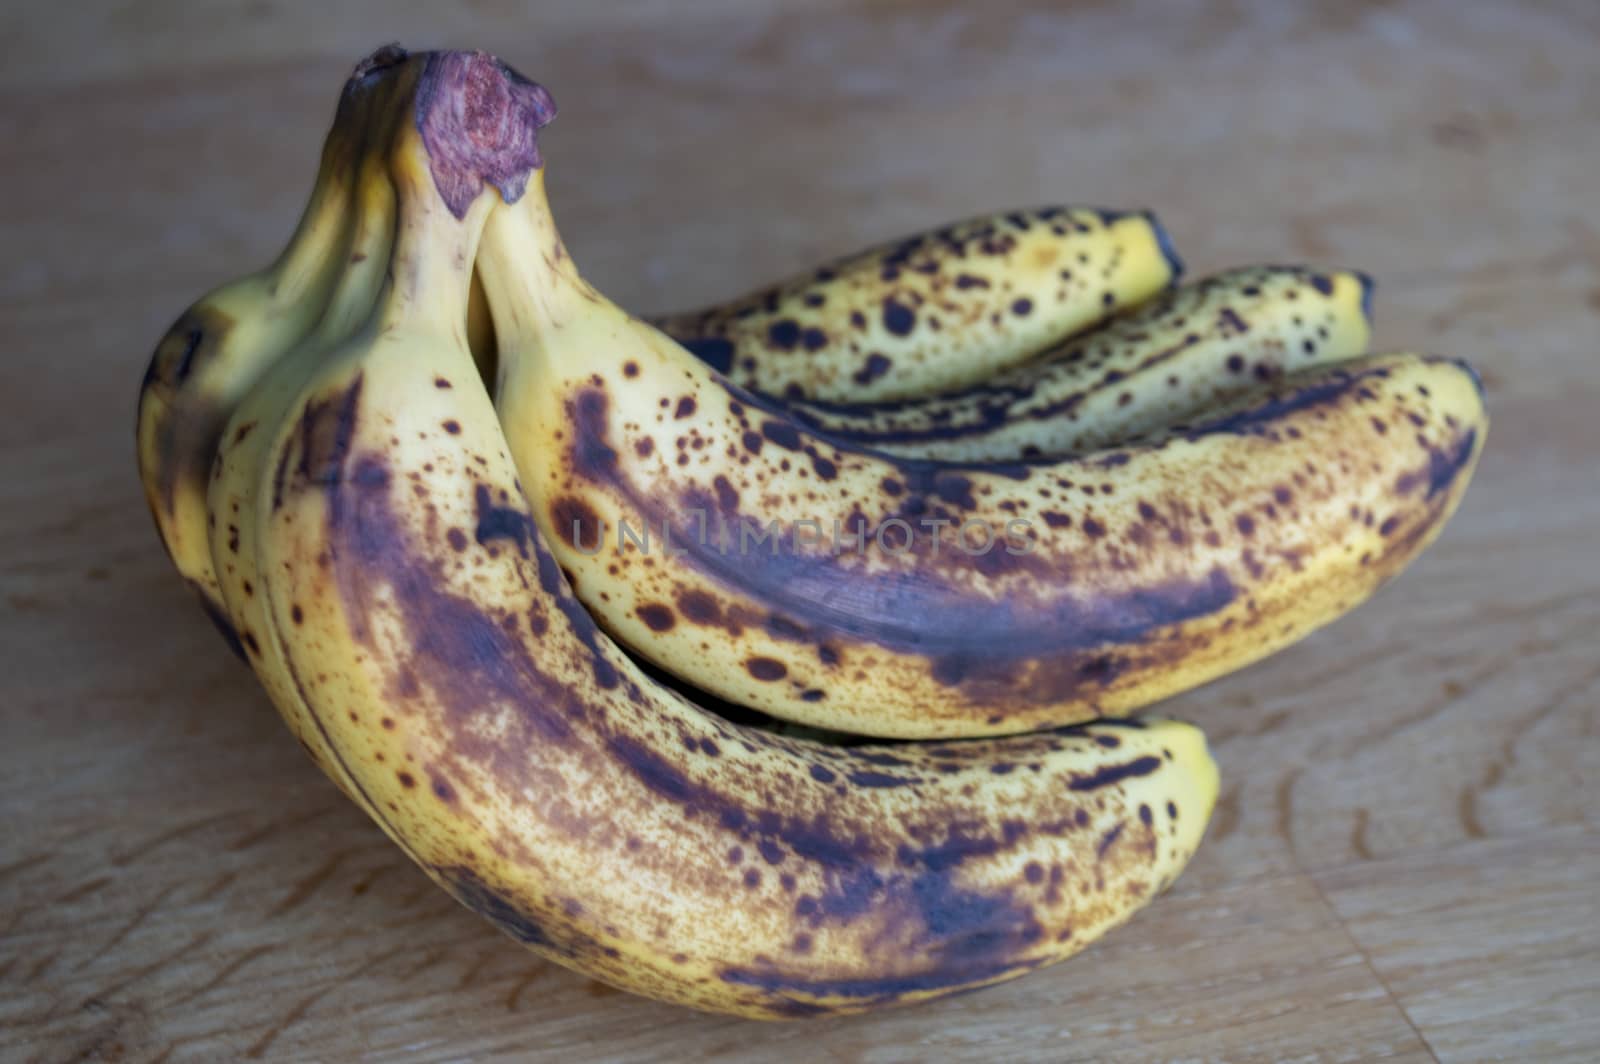 Bunch of ripe bananas on wooden background.